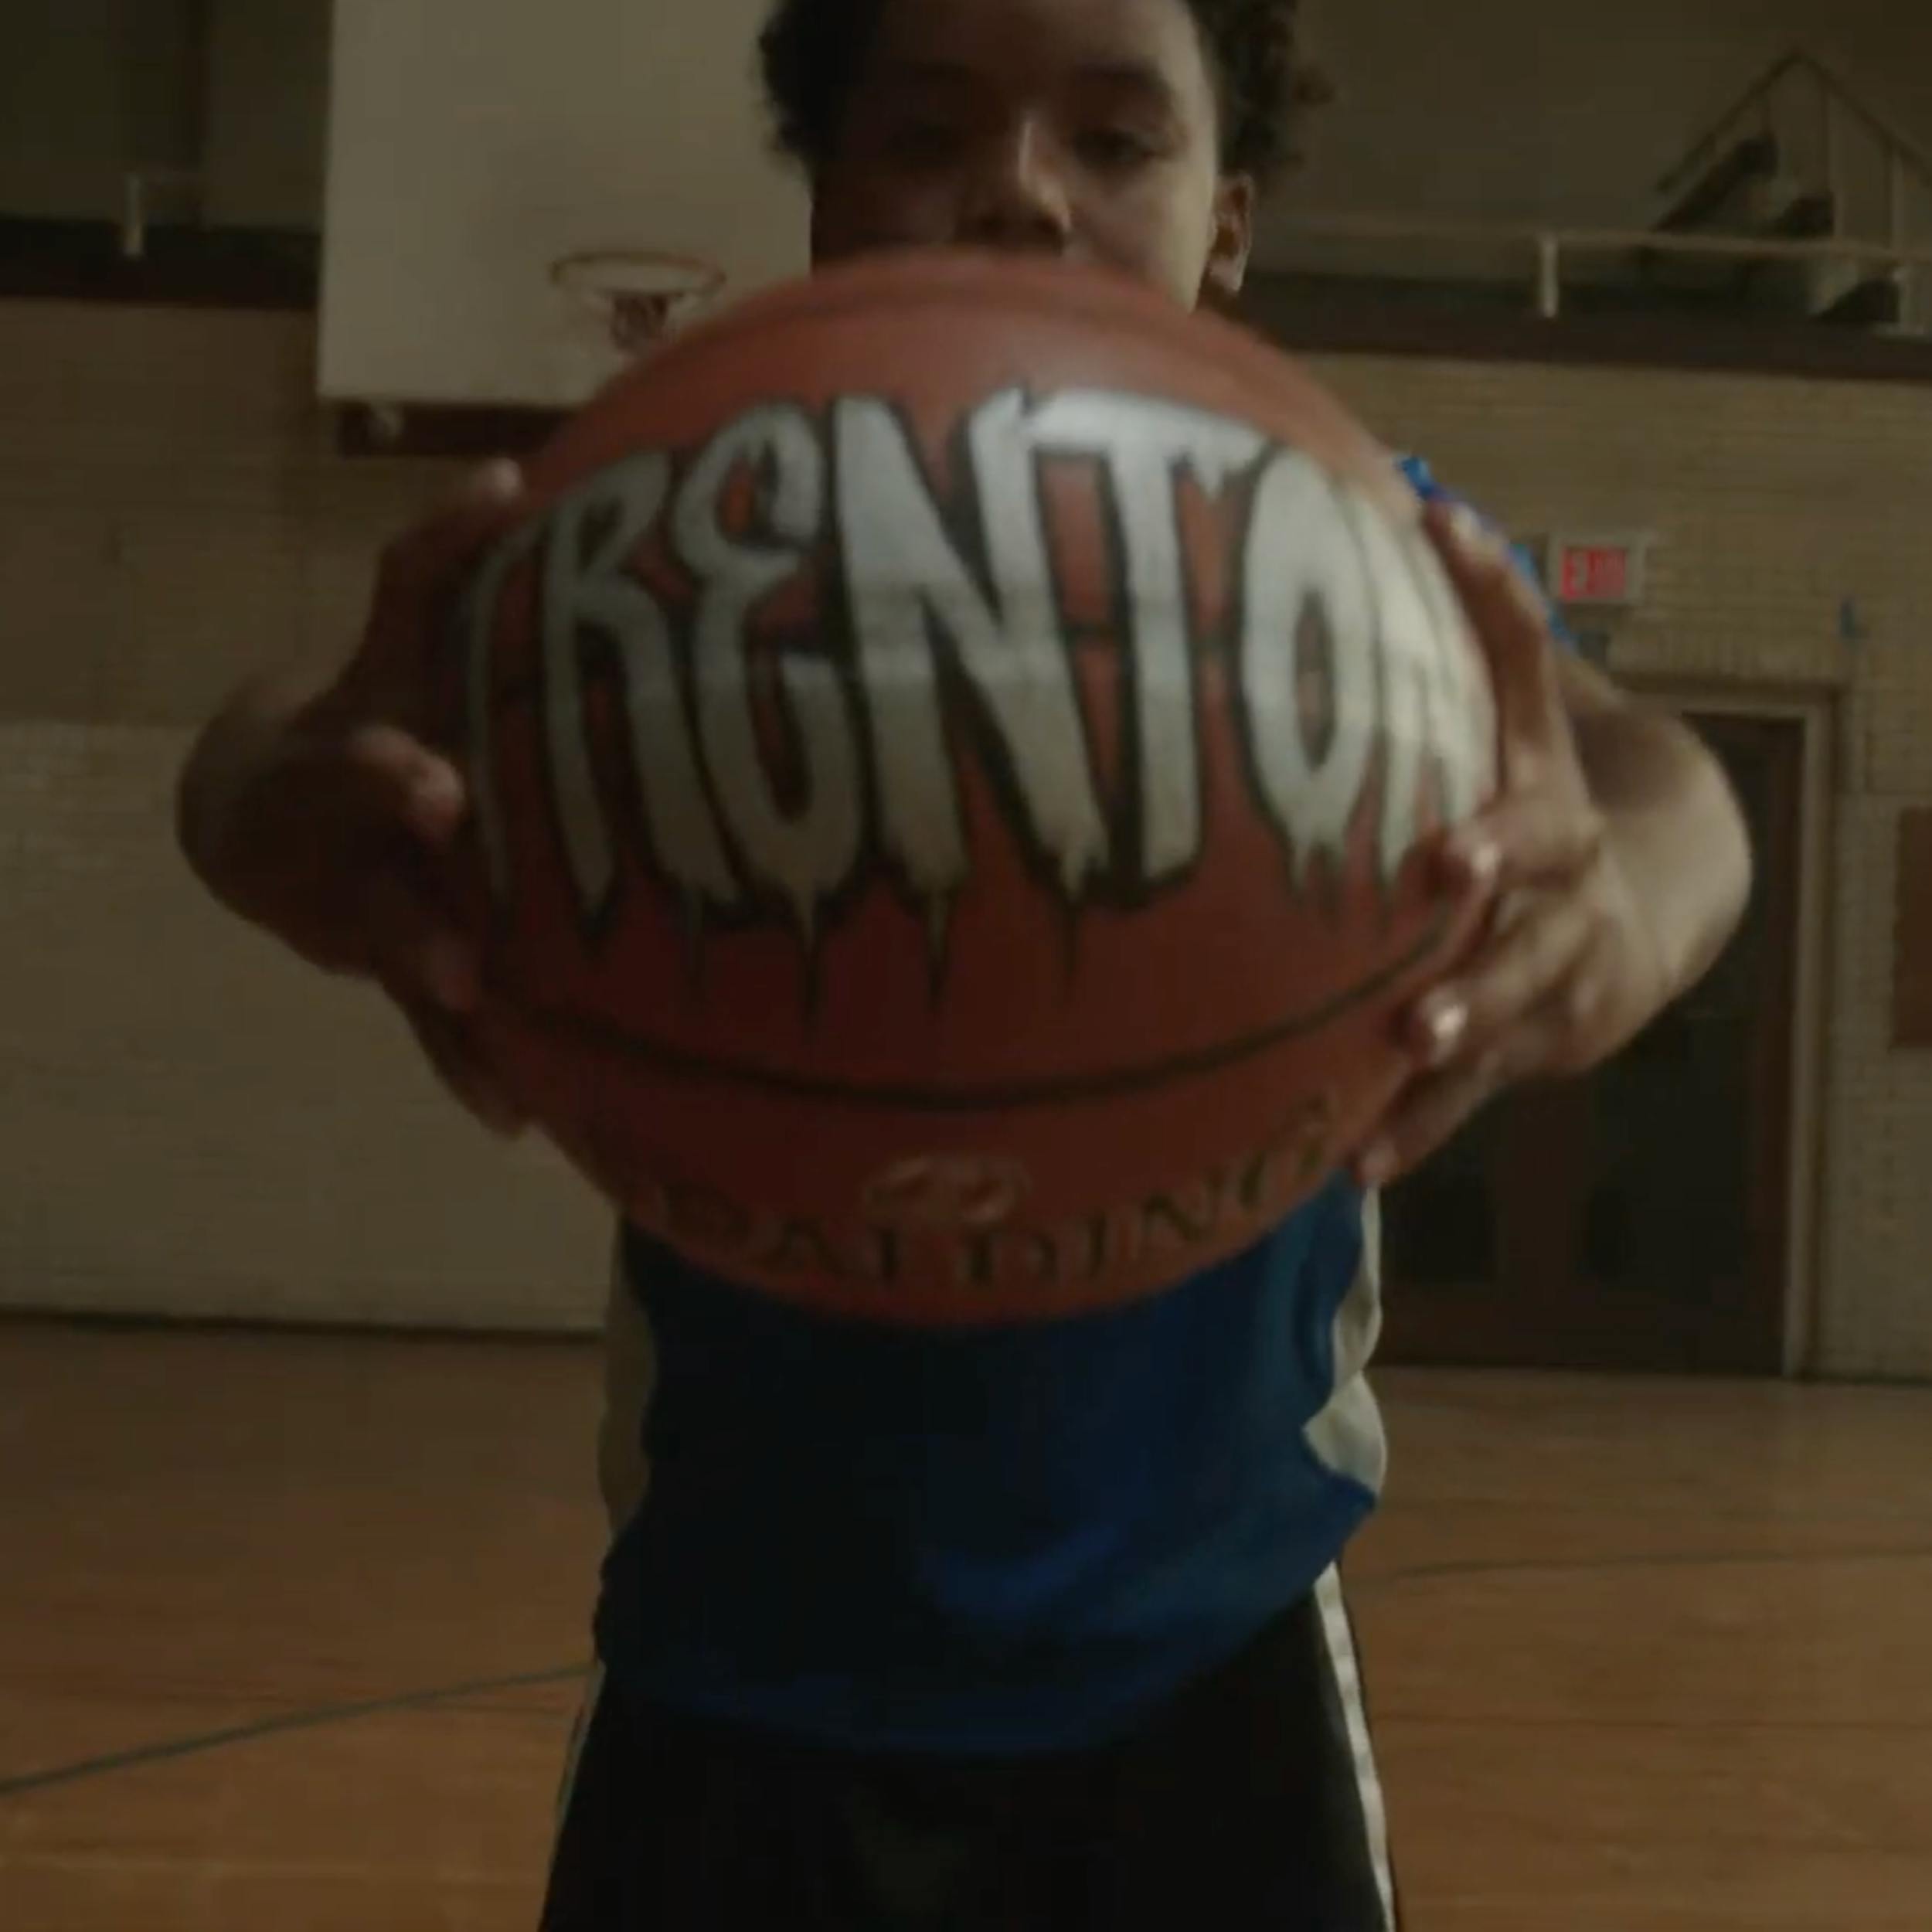 A boy holding a basketball with the text: Trenton